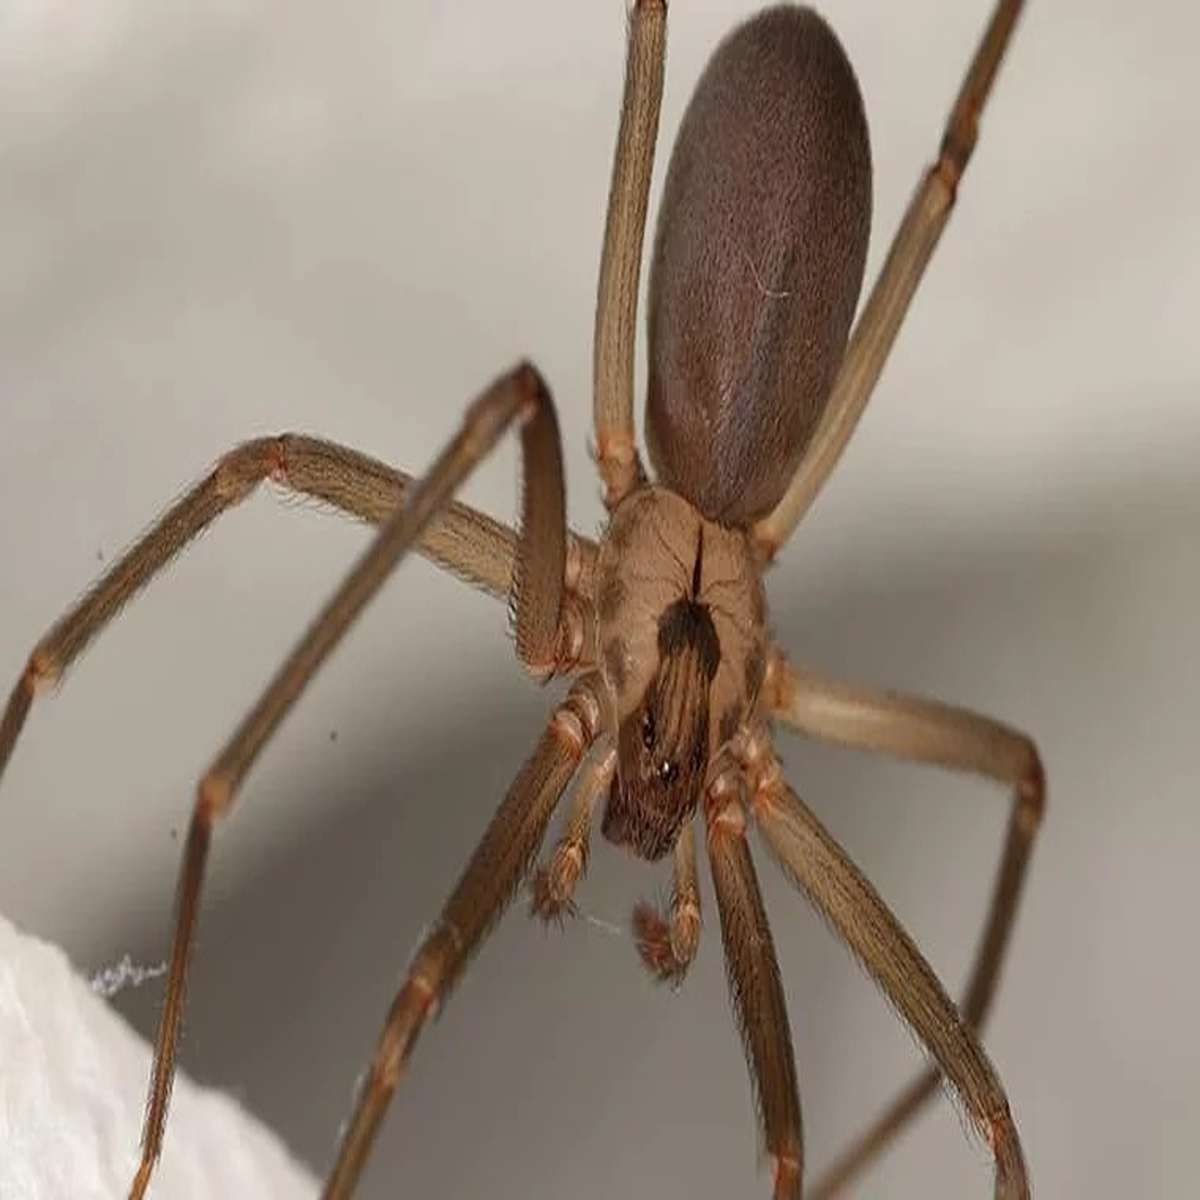 Certain species of spider, like the brown recluse, the way their venom works is that it makes your blood cells explode.